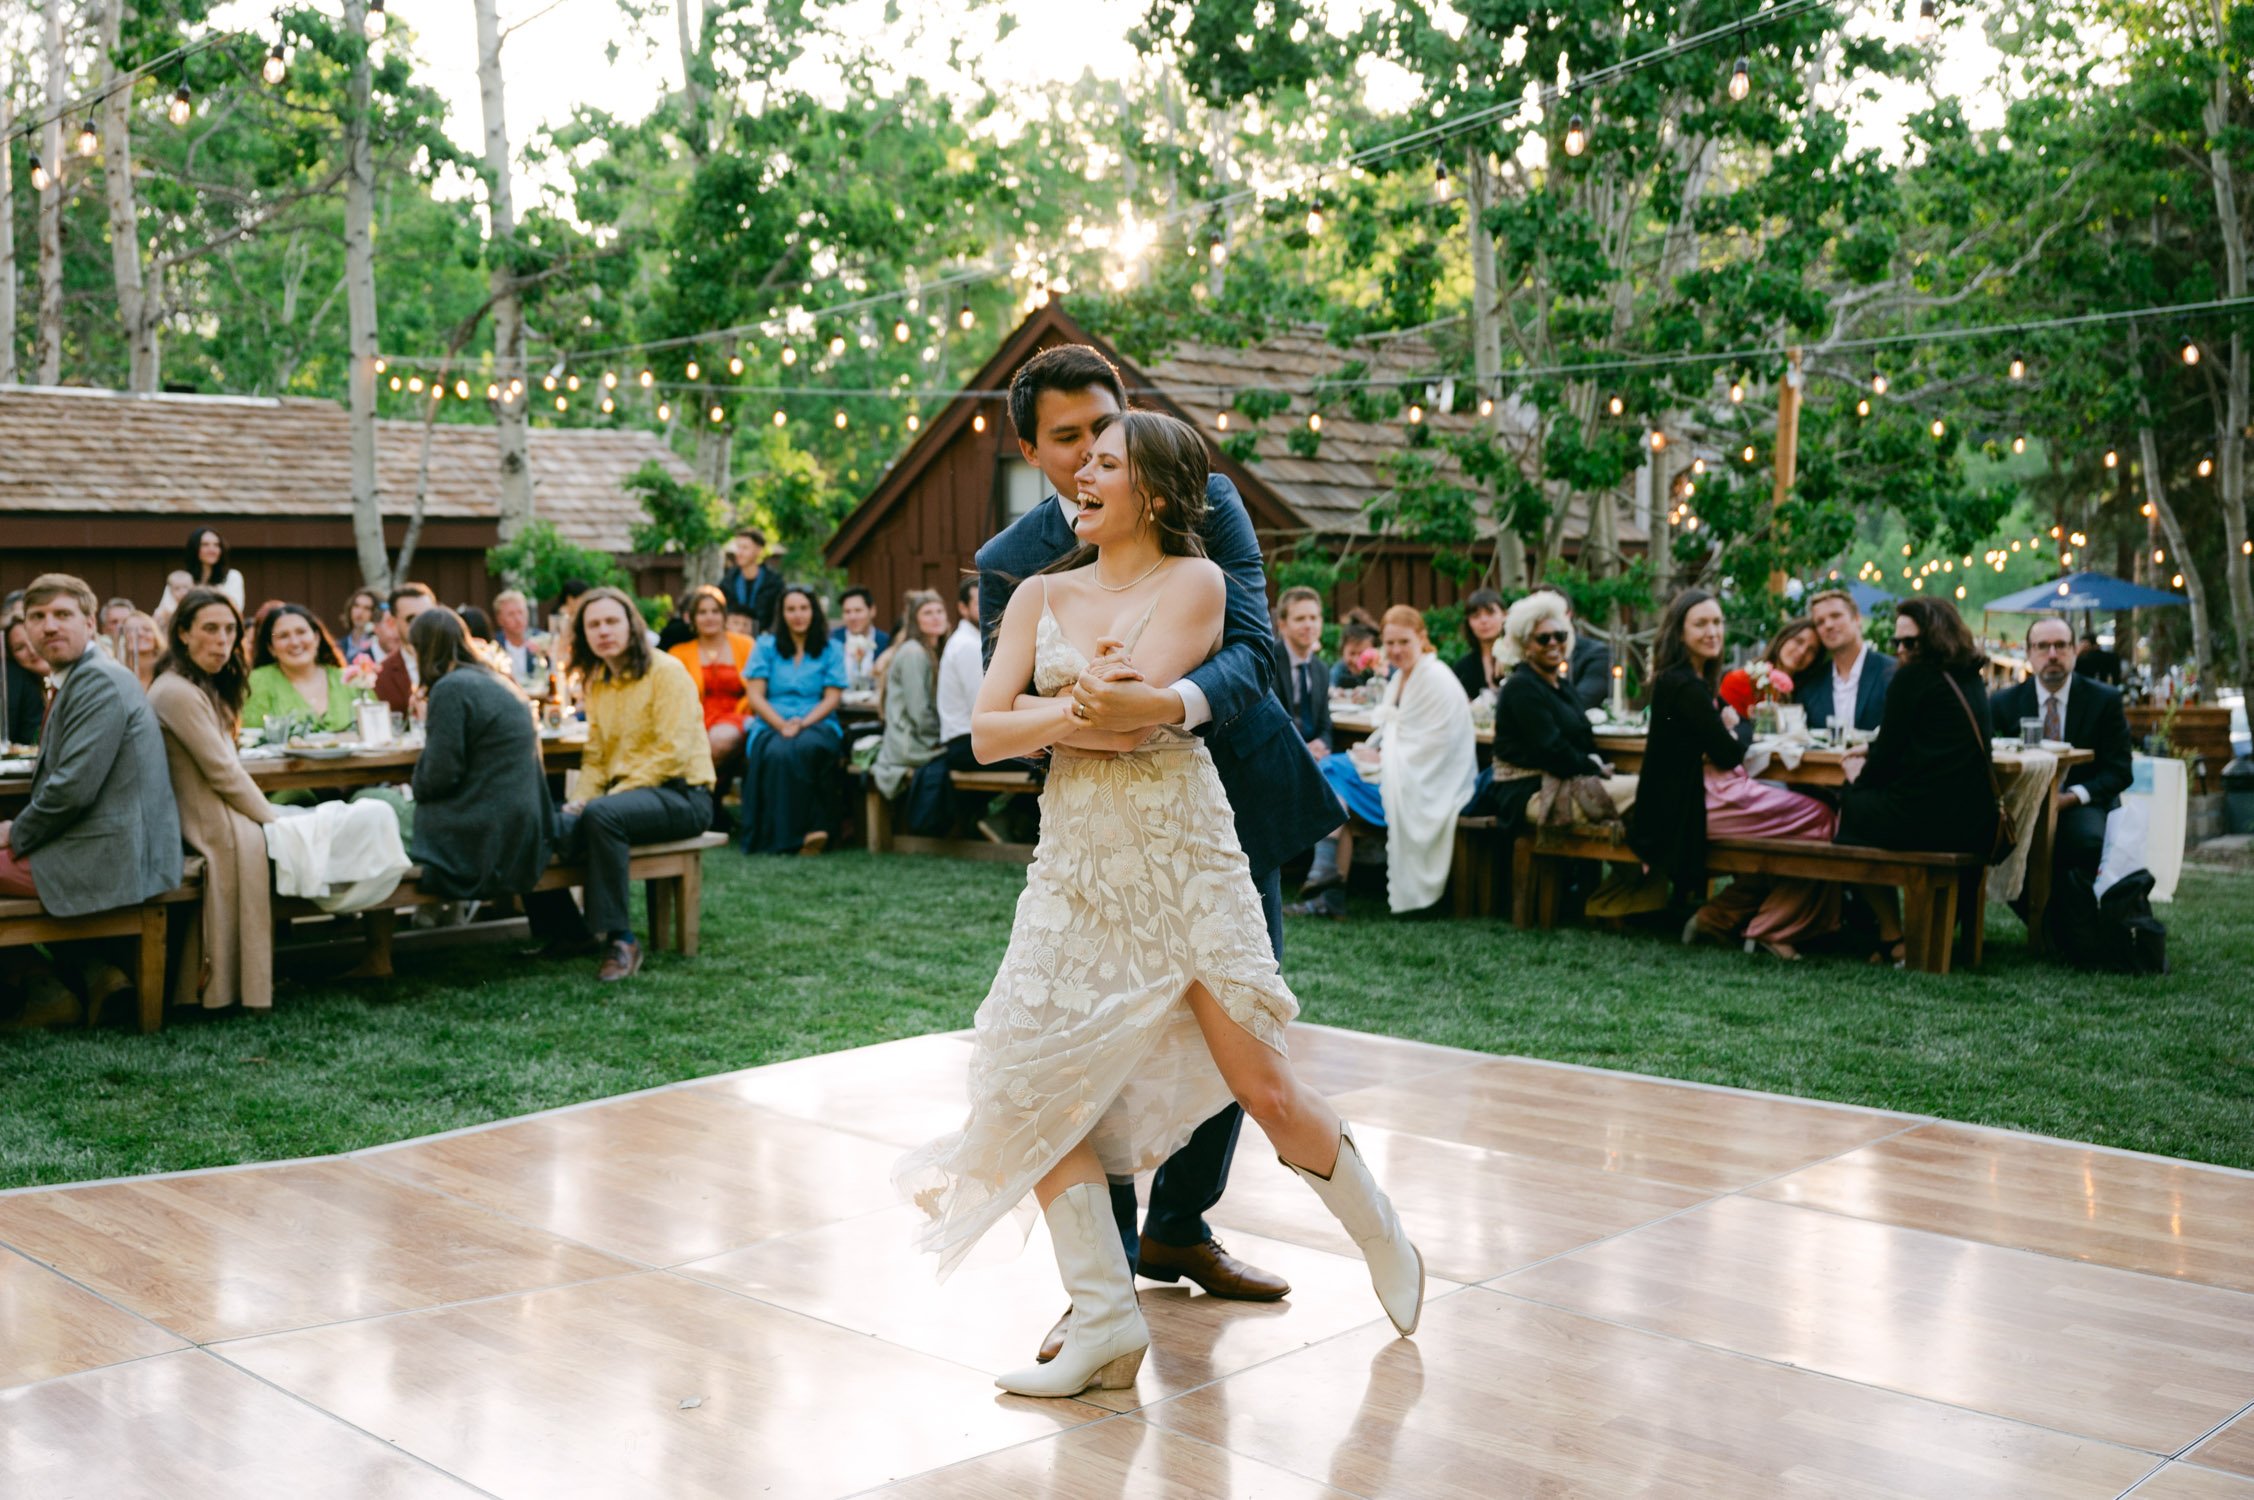 Desolation wilderness hotel wedding, photo of couple having their first dance as husband and wife